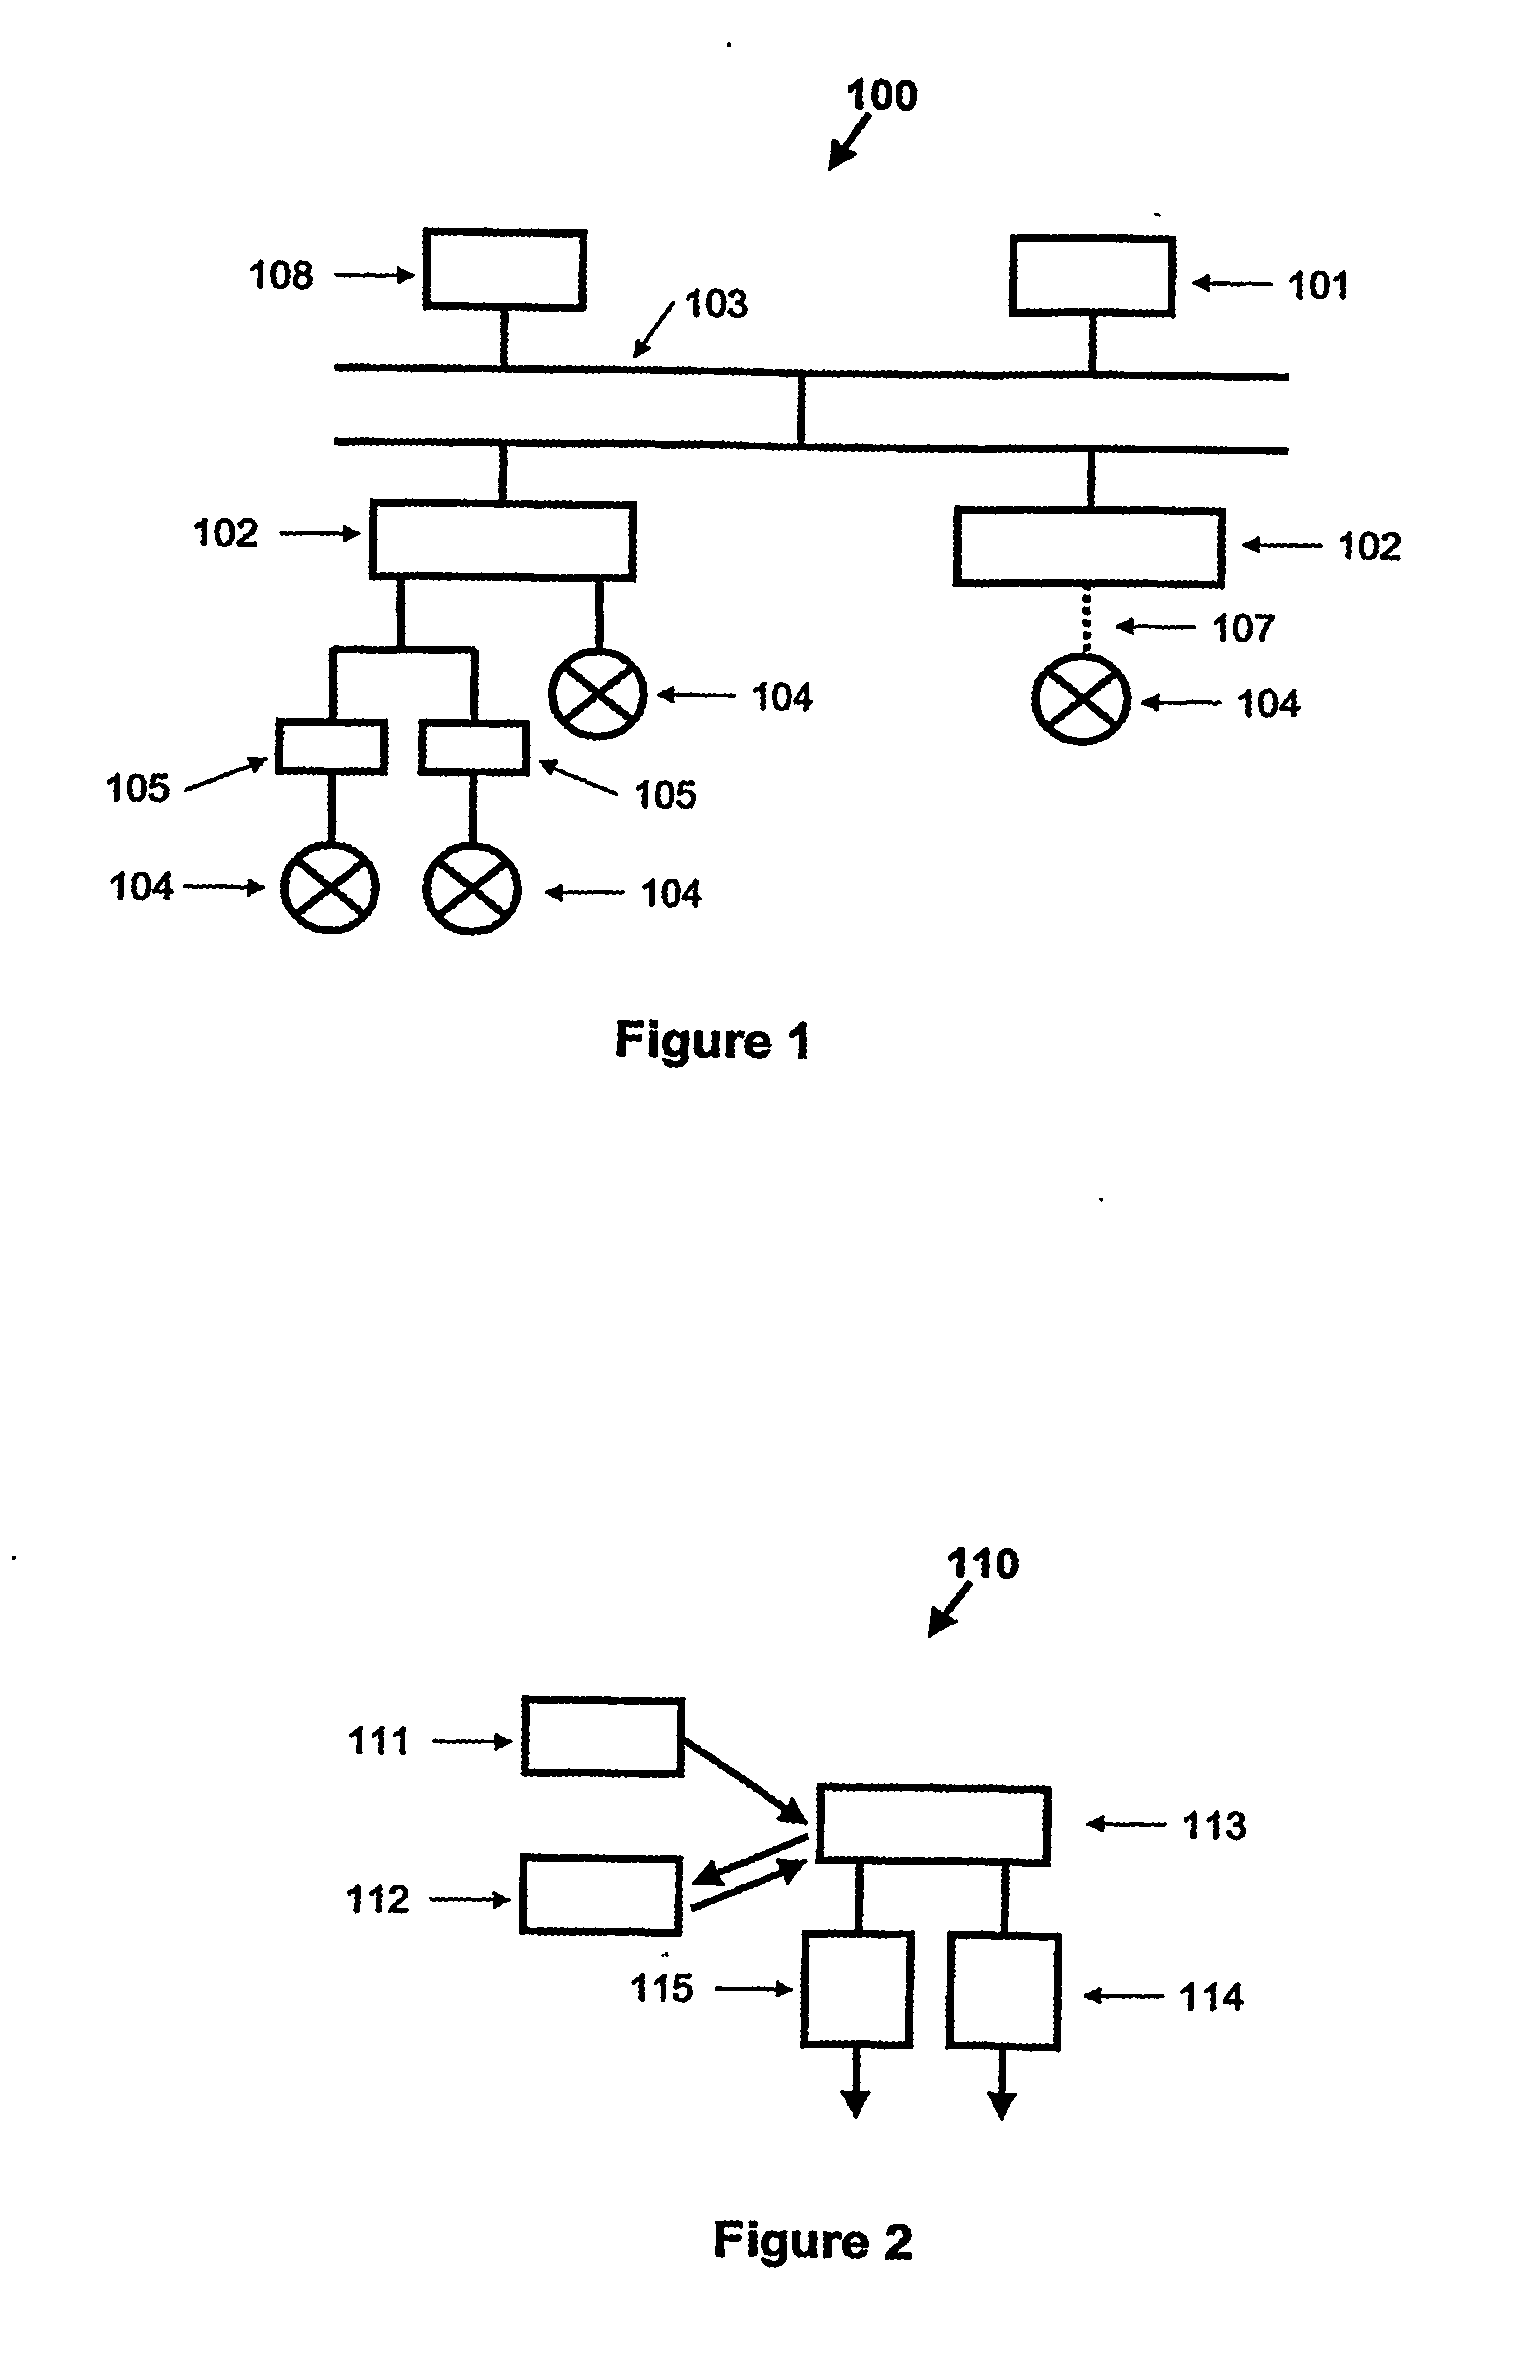 Method and a tool for allocating computational resources in a distributed control system